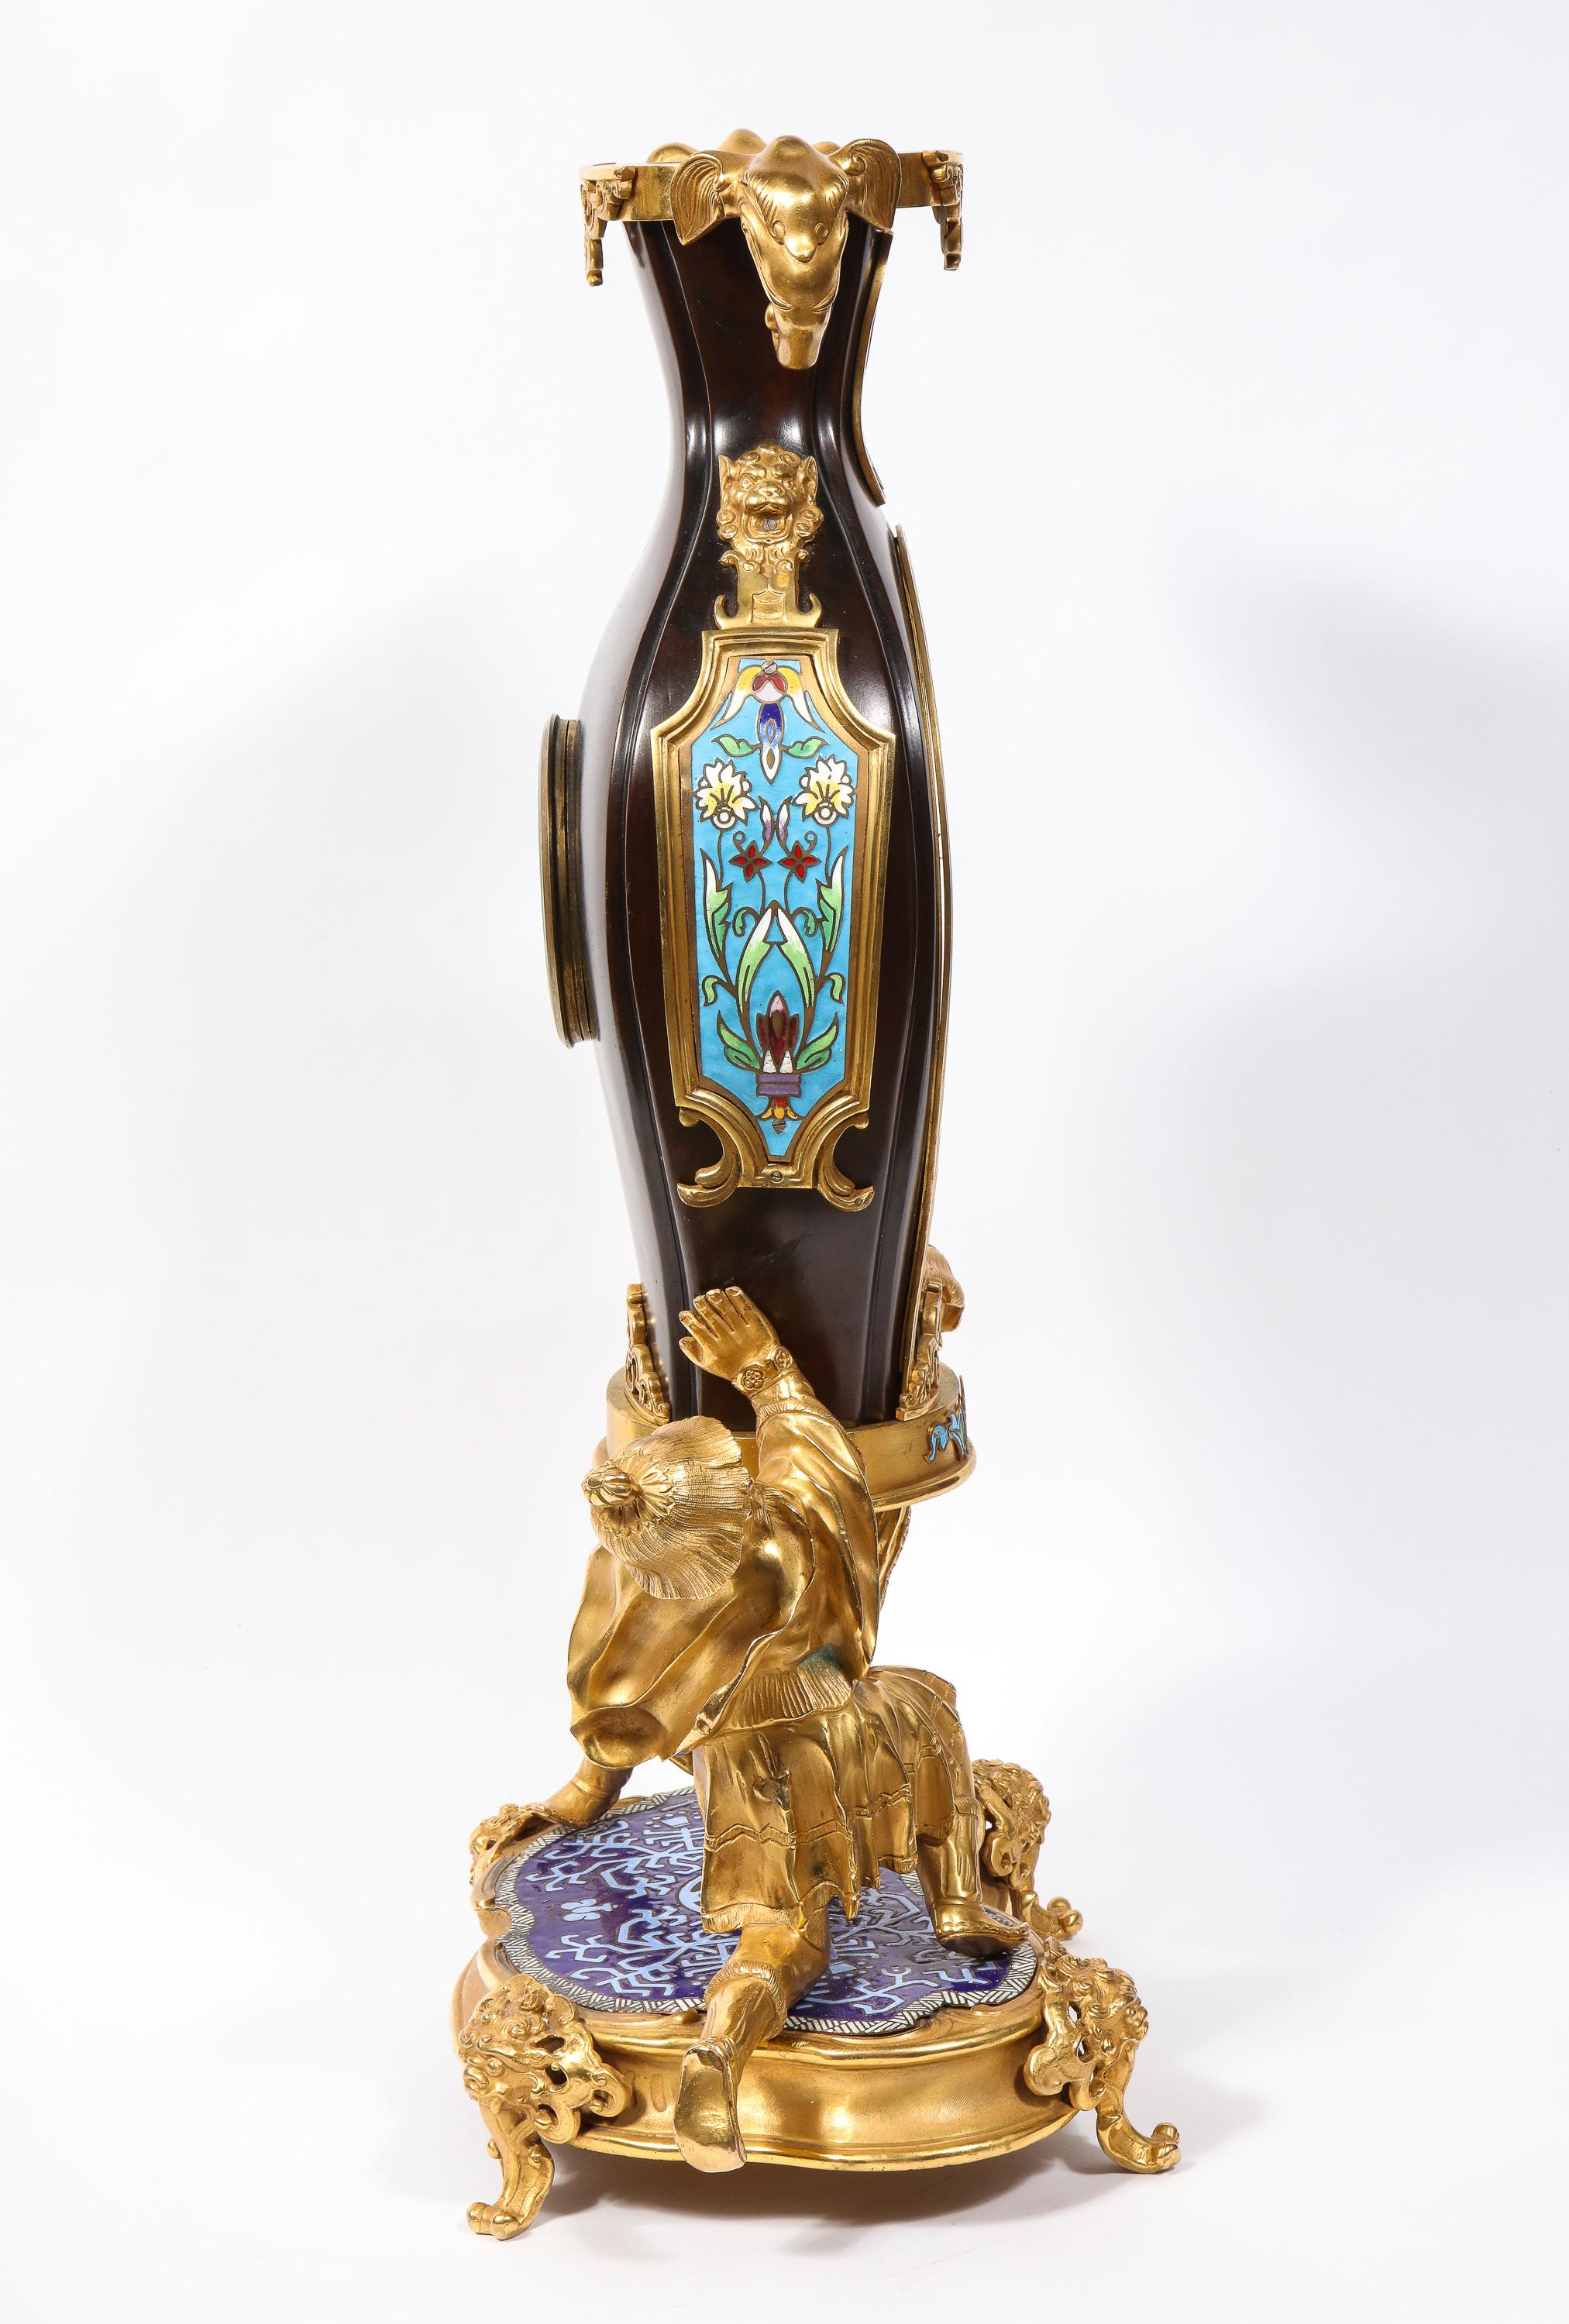 French Japonisme Ormolu, Patinated Bronze, and Cloisonne Enamel Mantel Clock In Good Condition For Sale In New York, NY